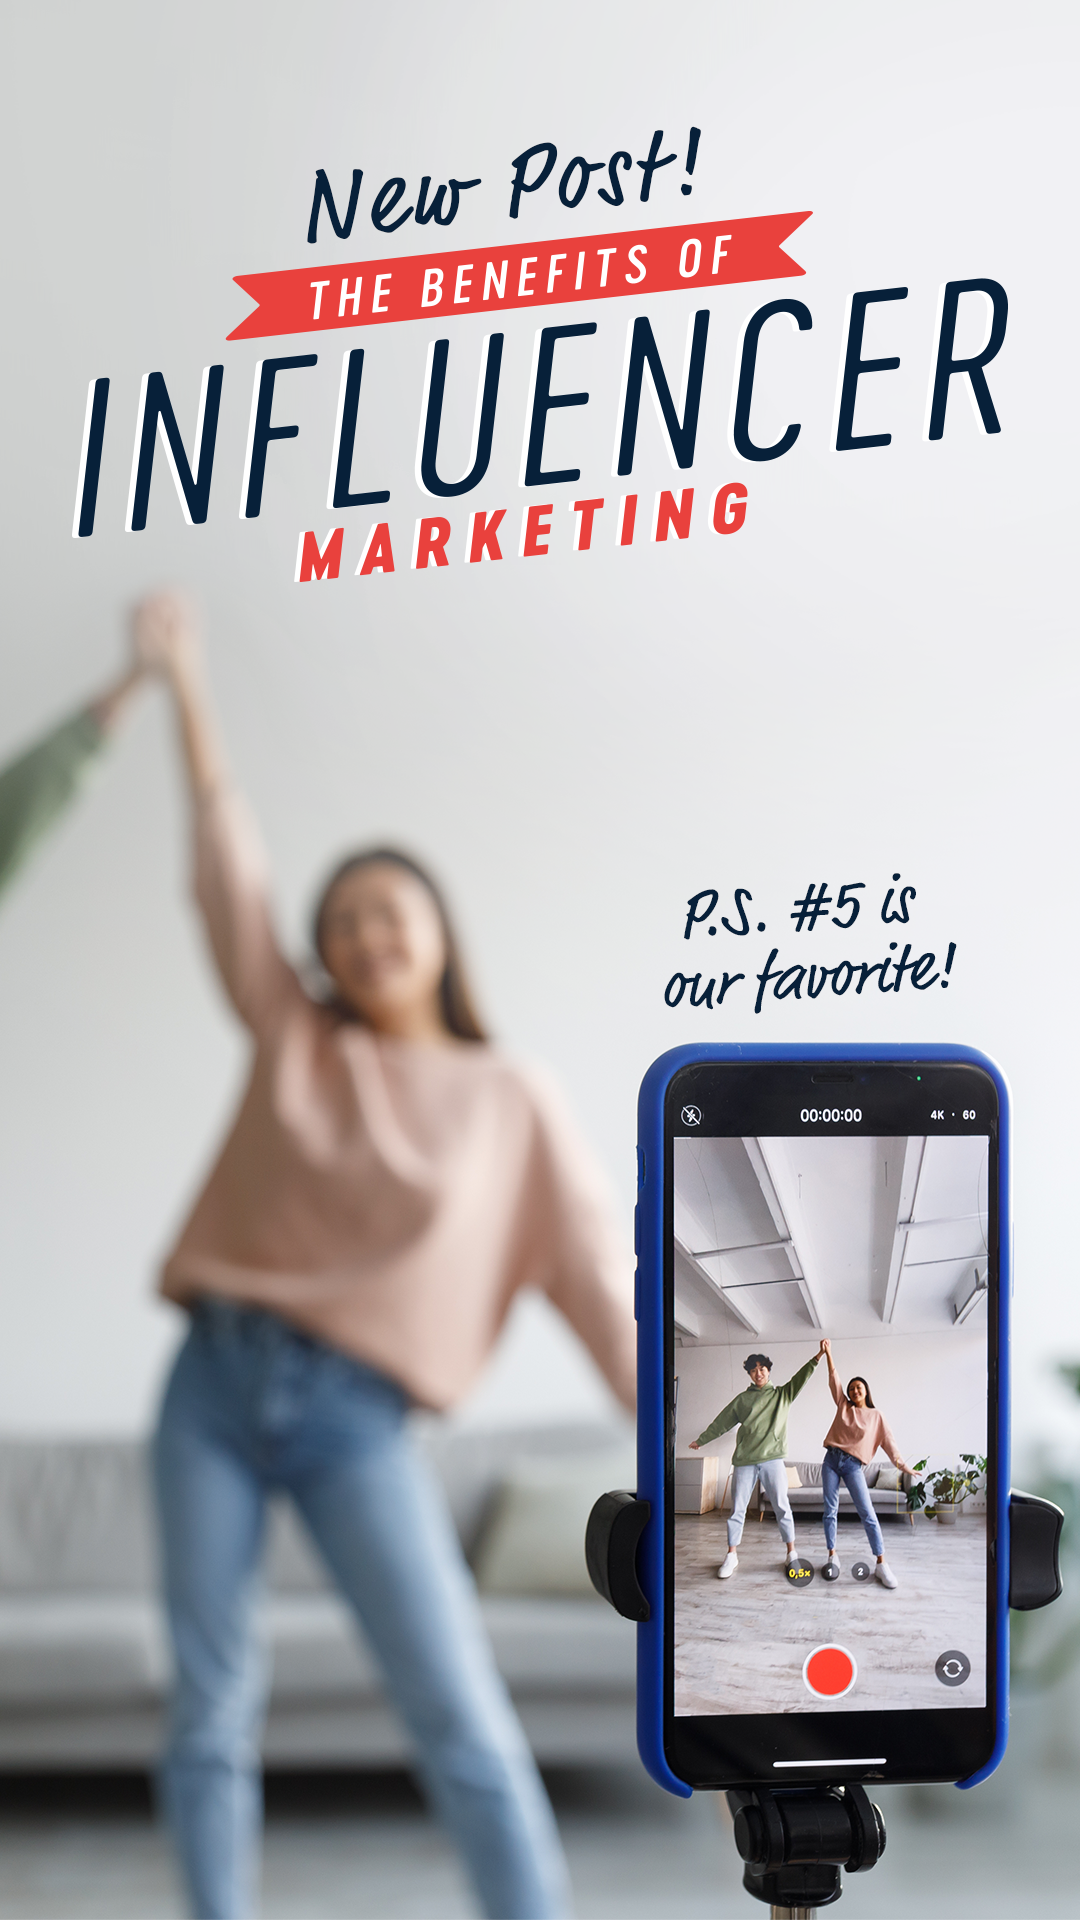 The Benefits of Influencer Marketing